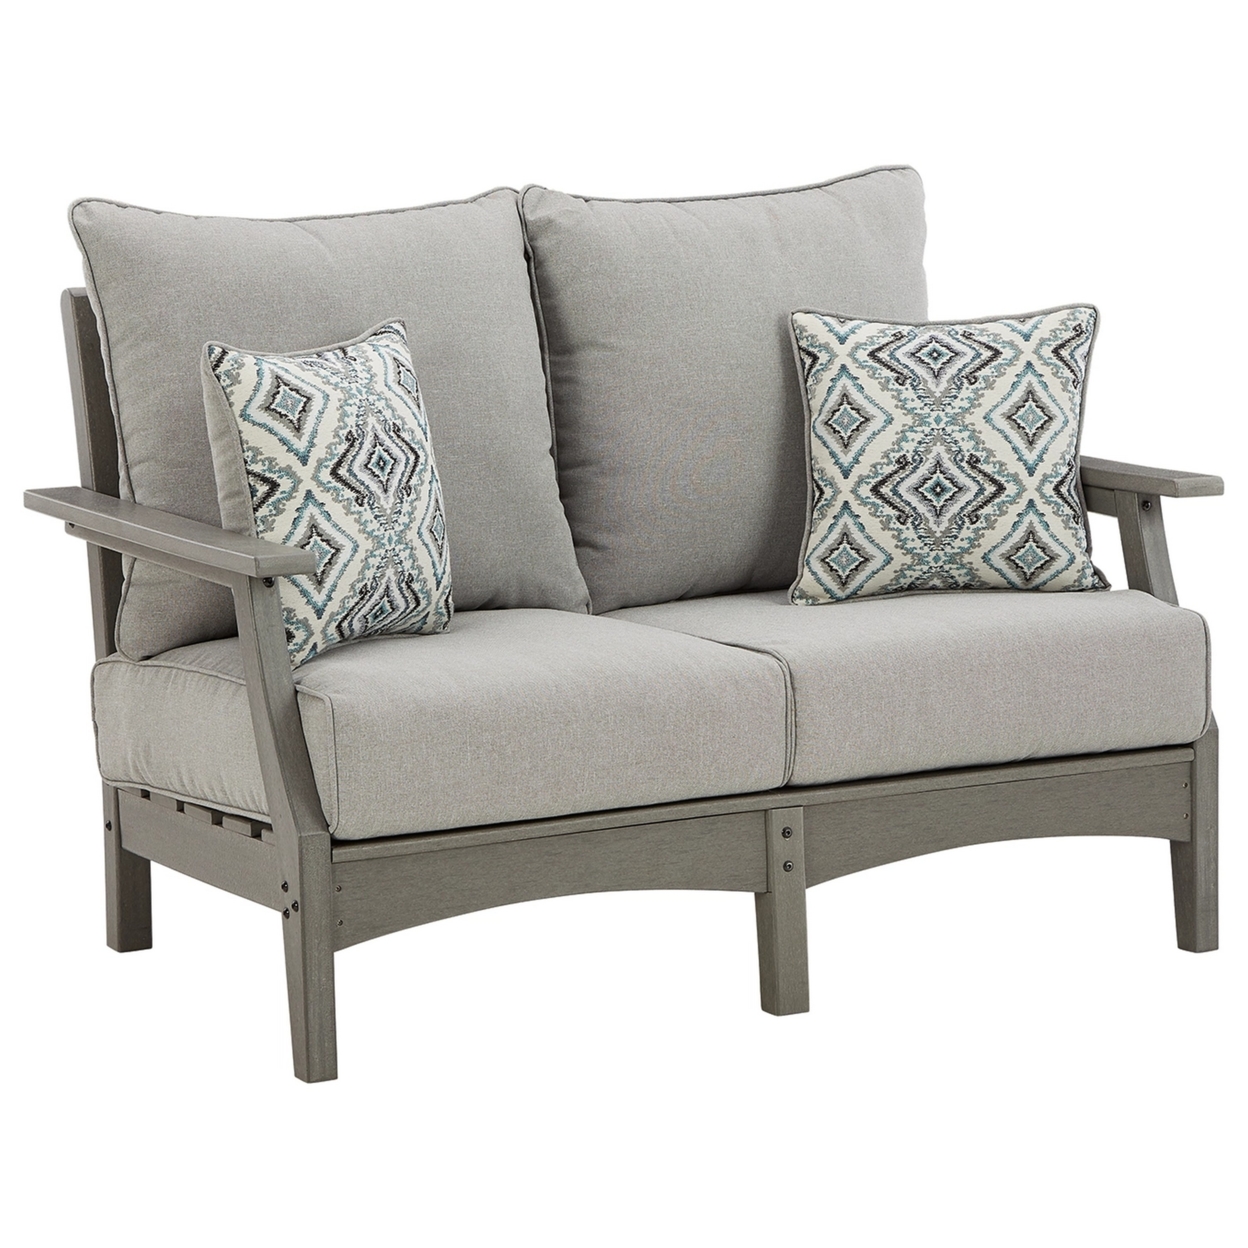 Outdoor Loveseat With Weather Resistant Fabric Cushions, Gray- Saltoro Sherpi